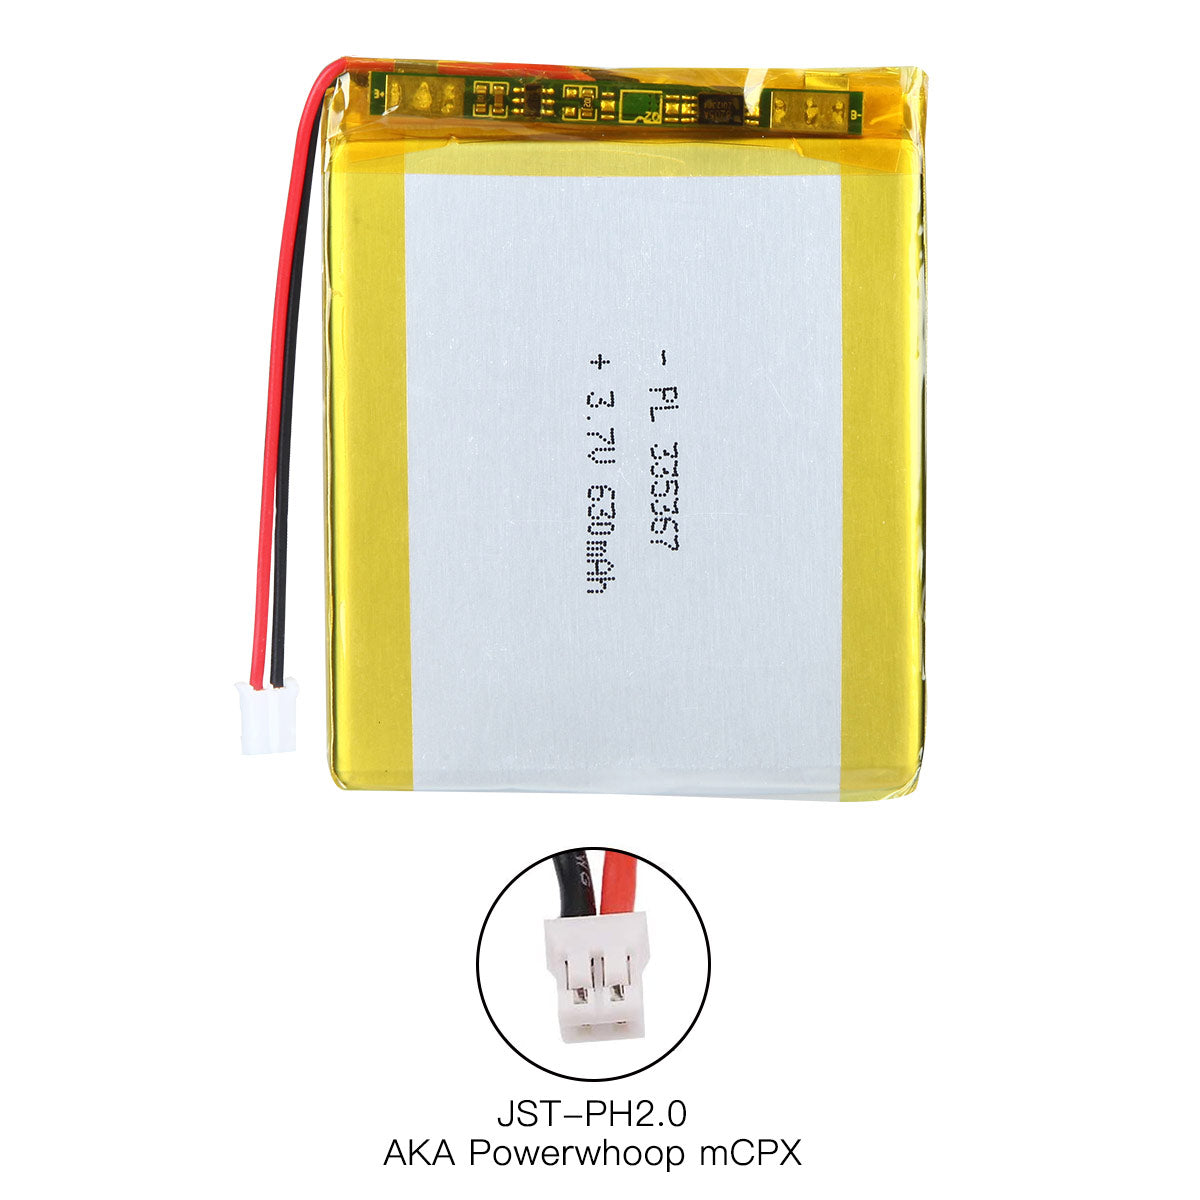 YDL 3.7V 630mAh 335367 Rechargeable Lithium Polymer Battery Length 69mm